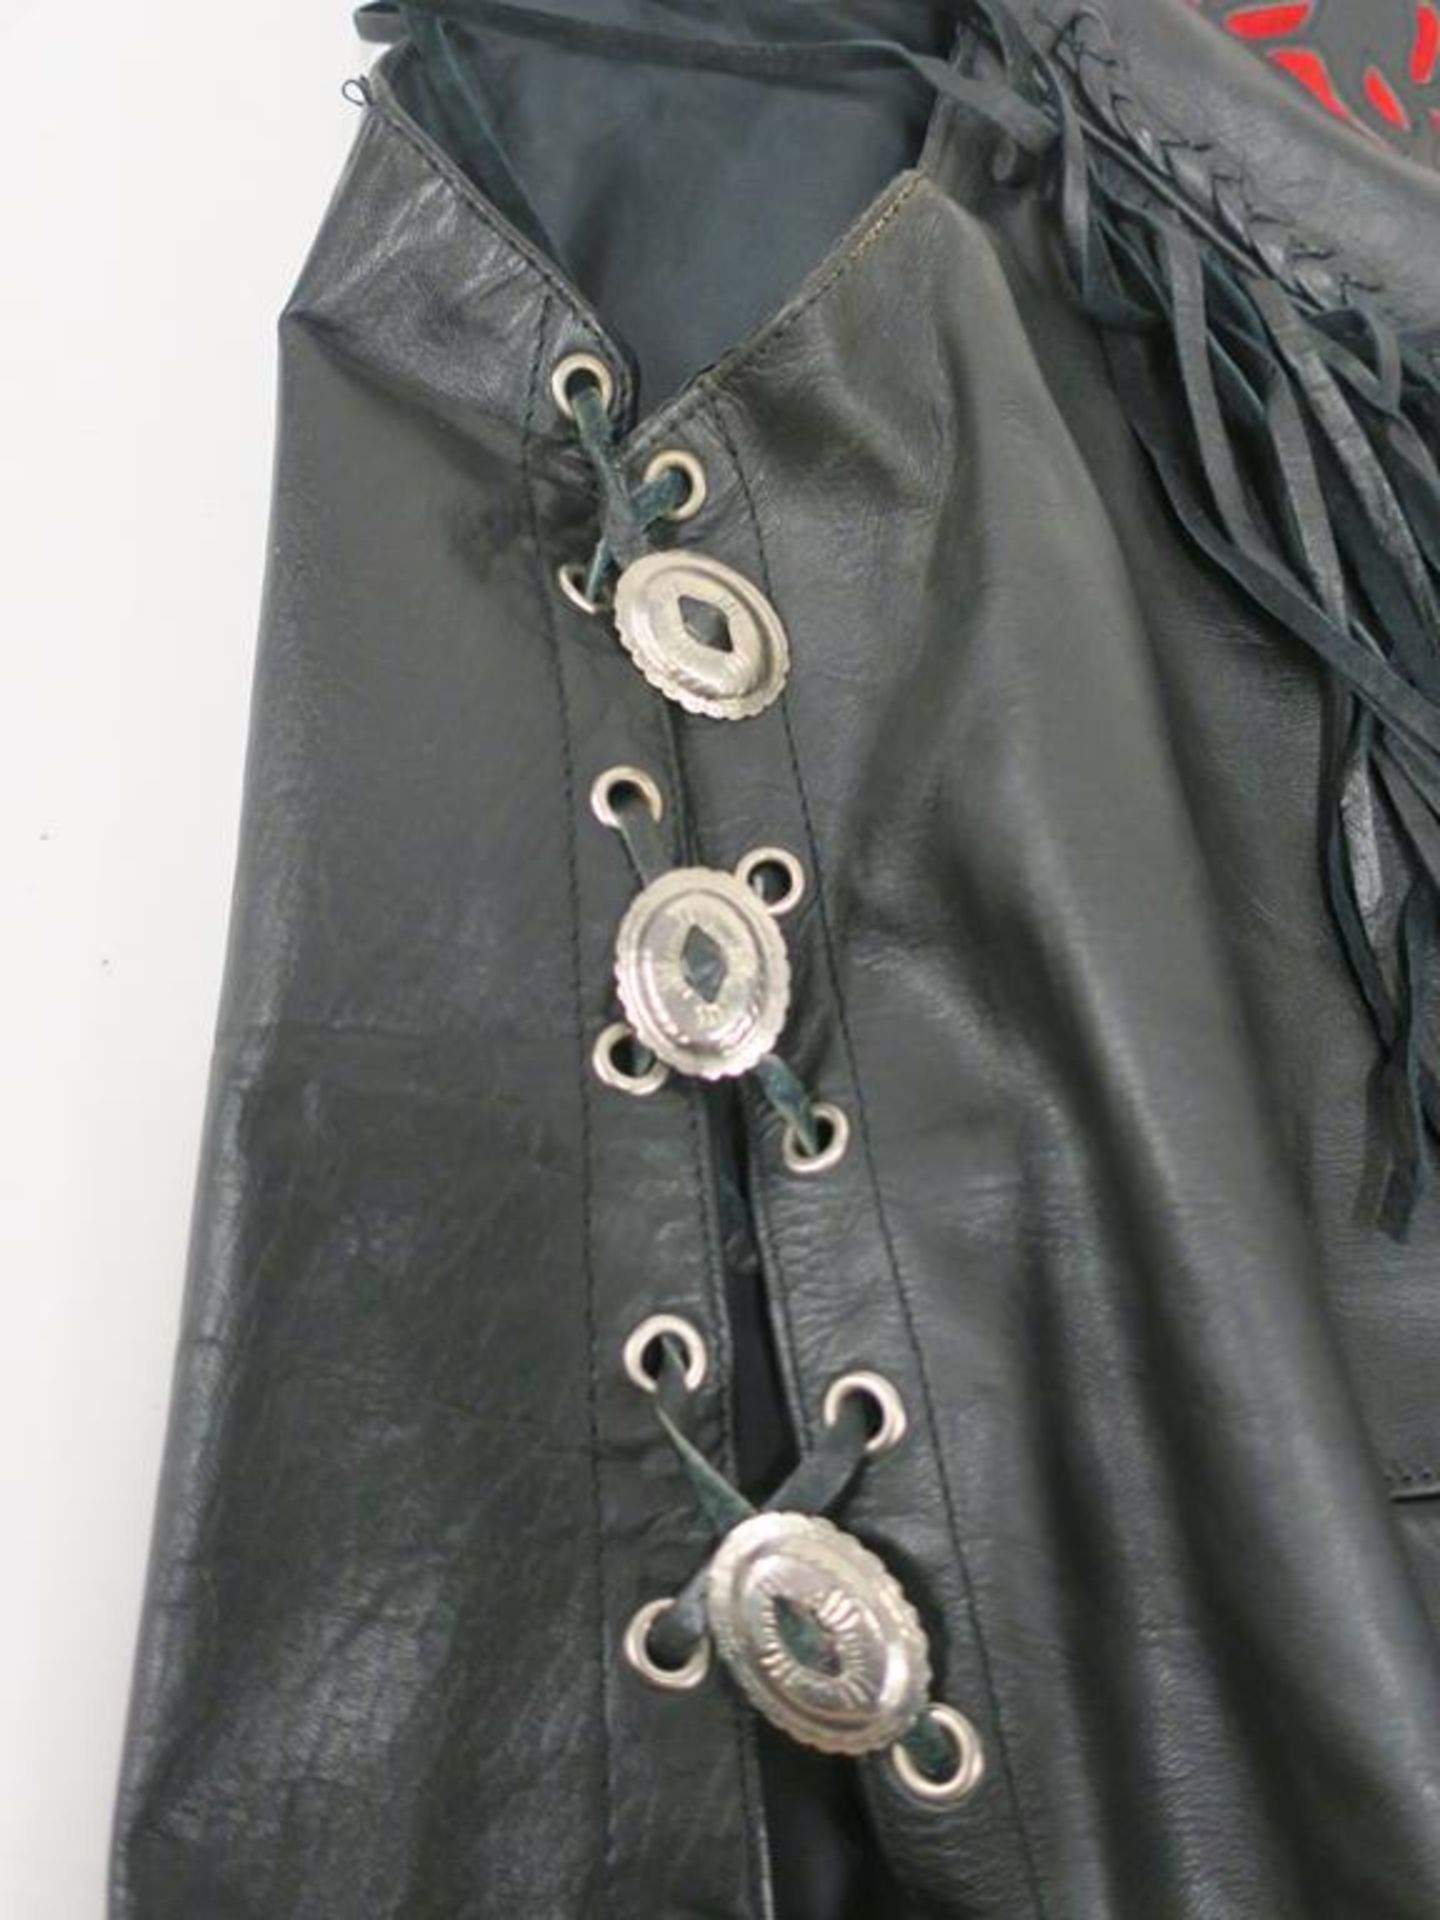 A pair of Harley Davidson (?) Leather Sheen Chaps and Shaf Leather Waistcoat (2) (est £50-£70) - Image 4 of 10